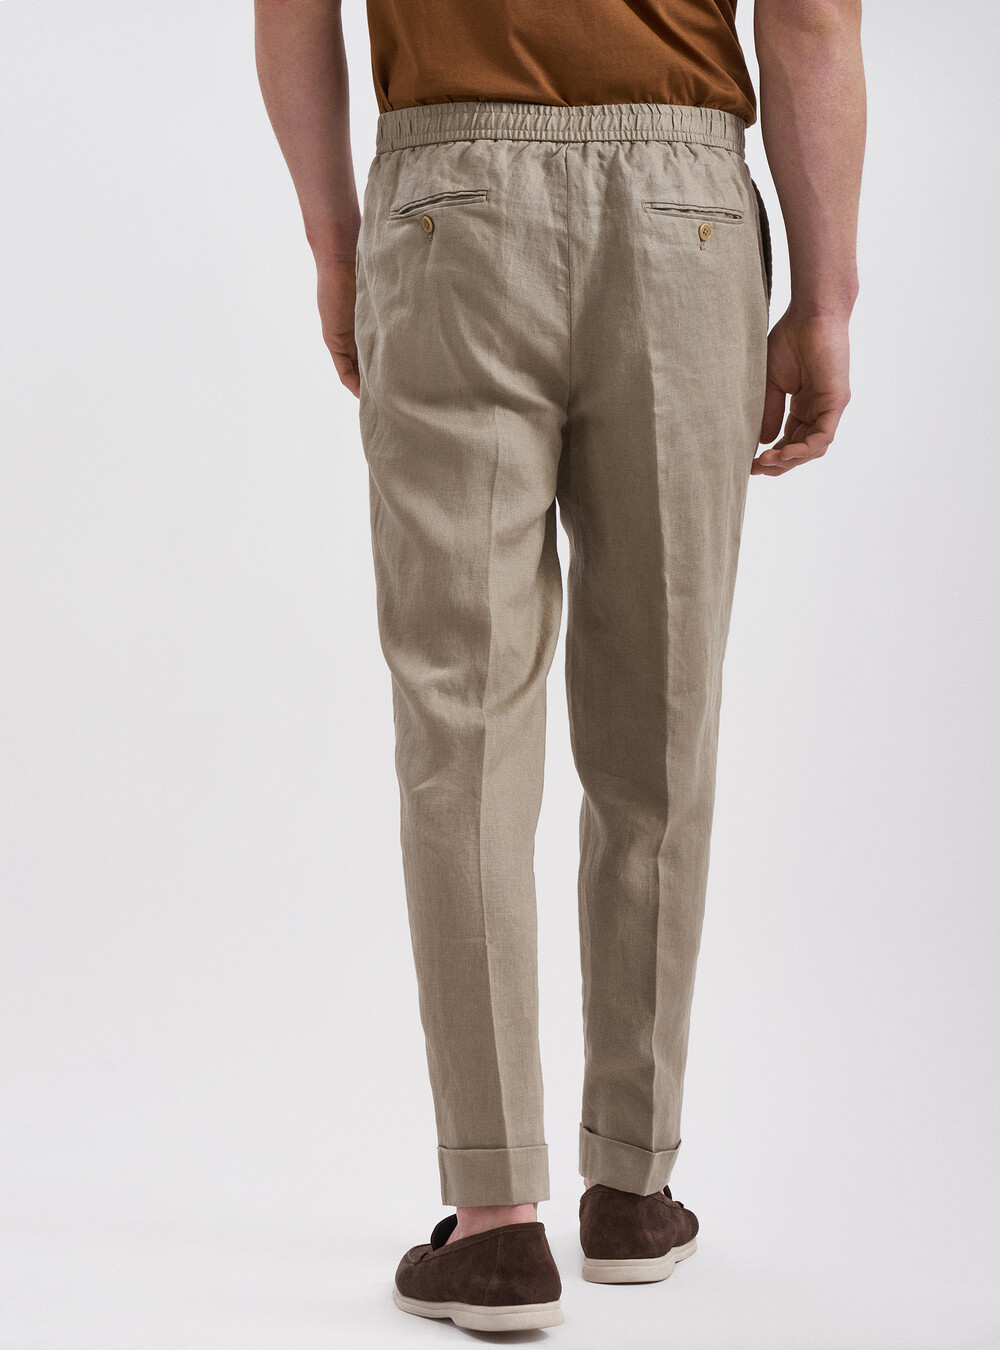 Linen trousers with drawstring | GutteridgeUS | Trousers Uomo